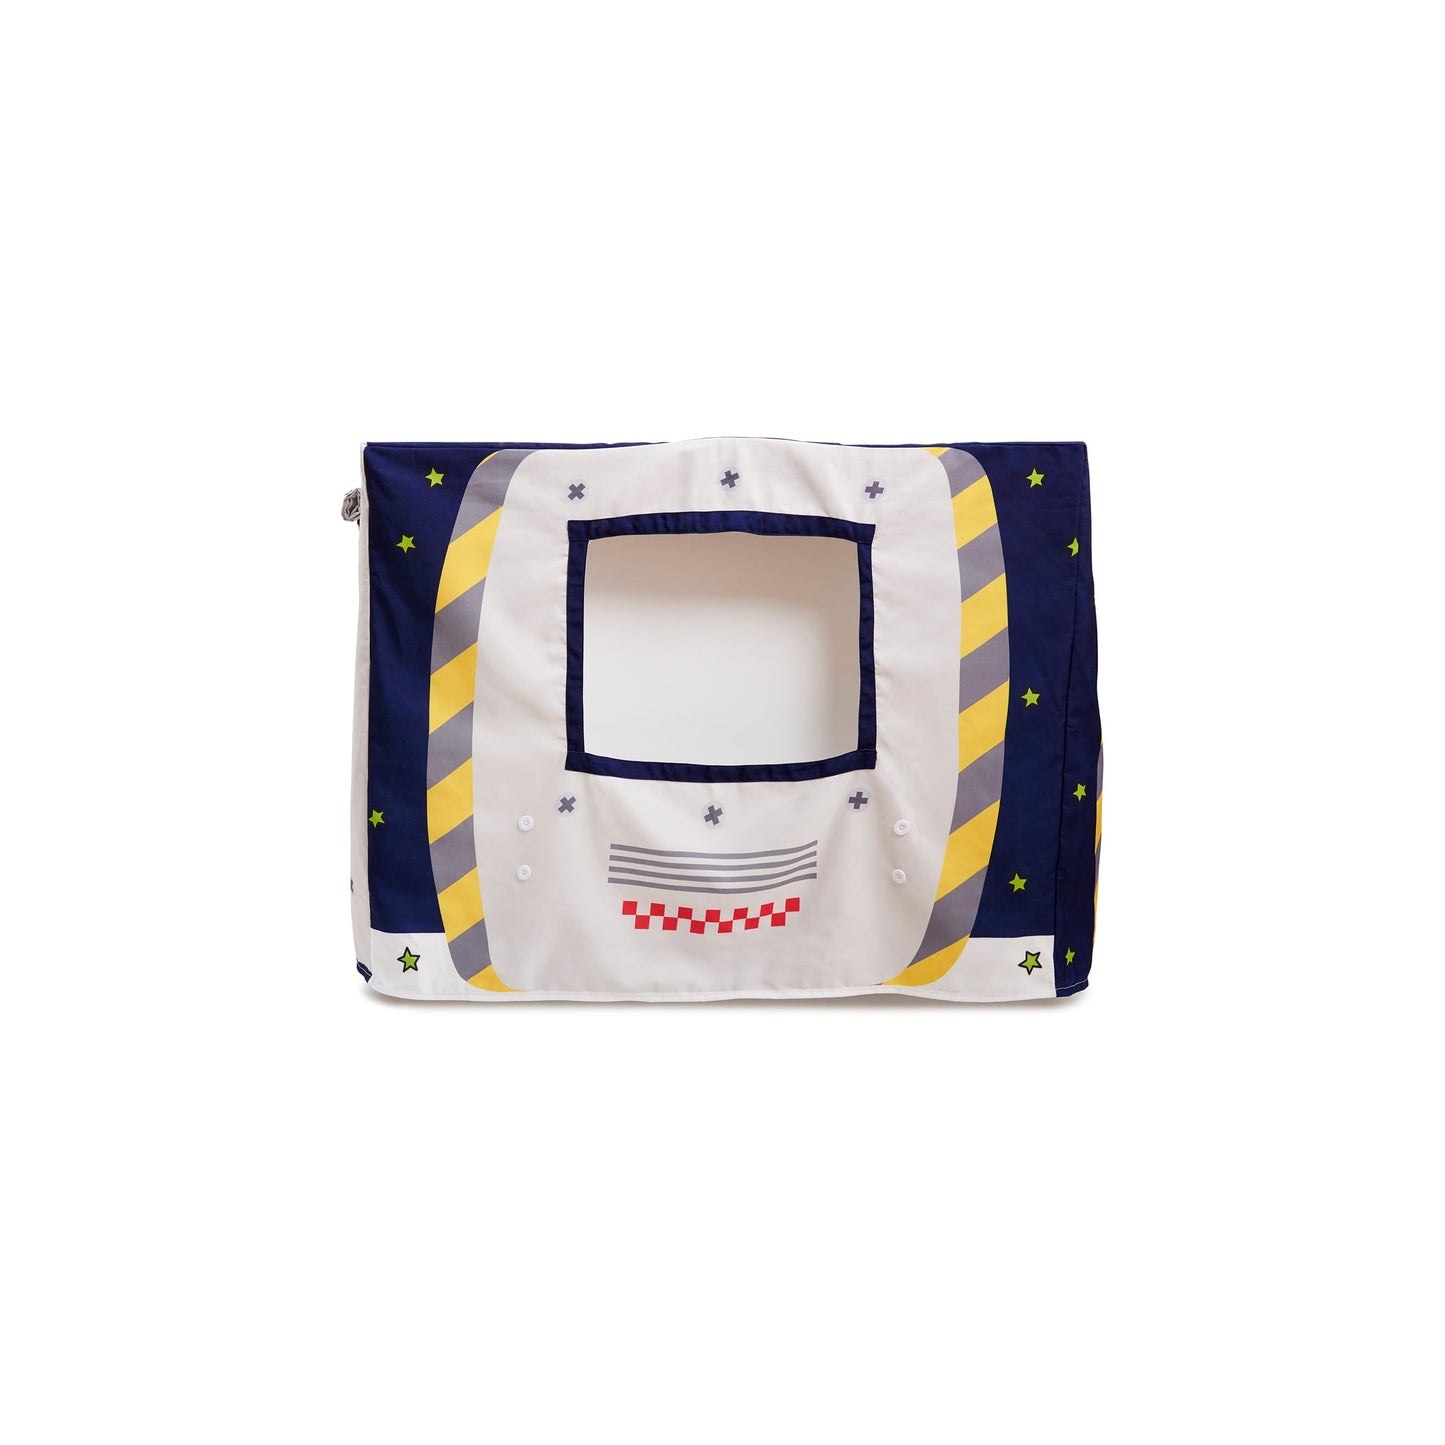 Space Station Table Tent